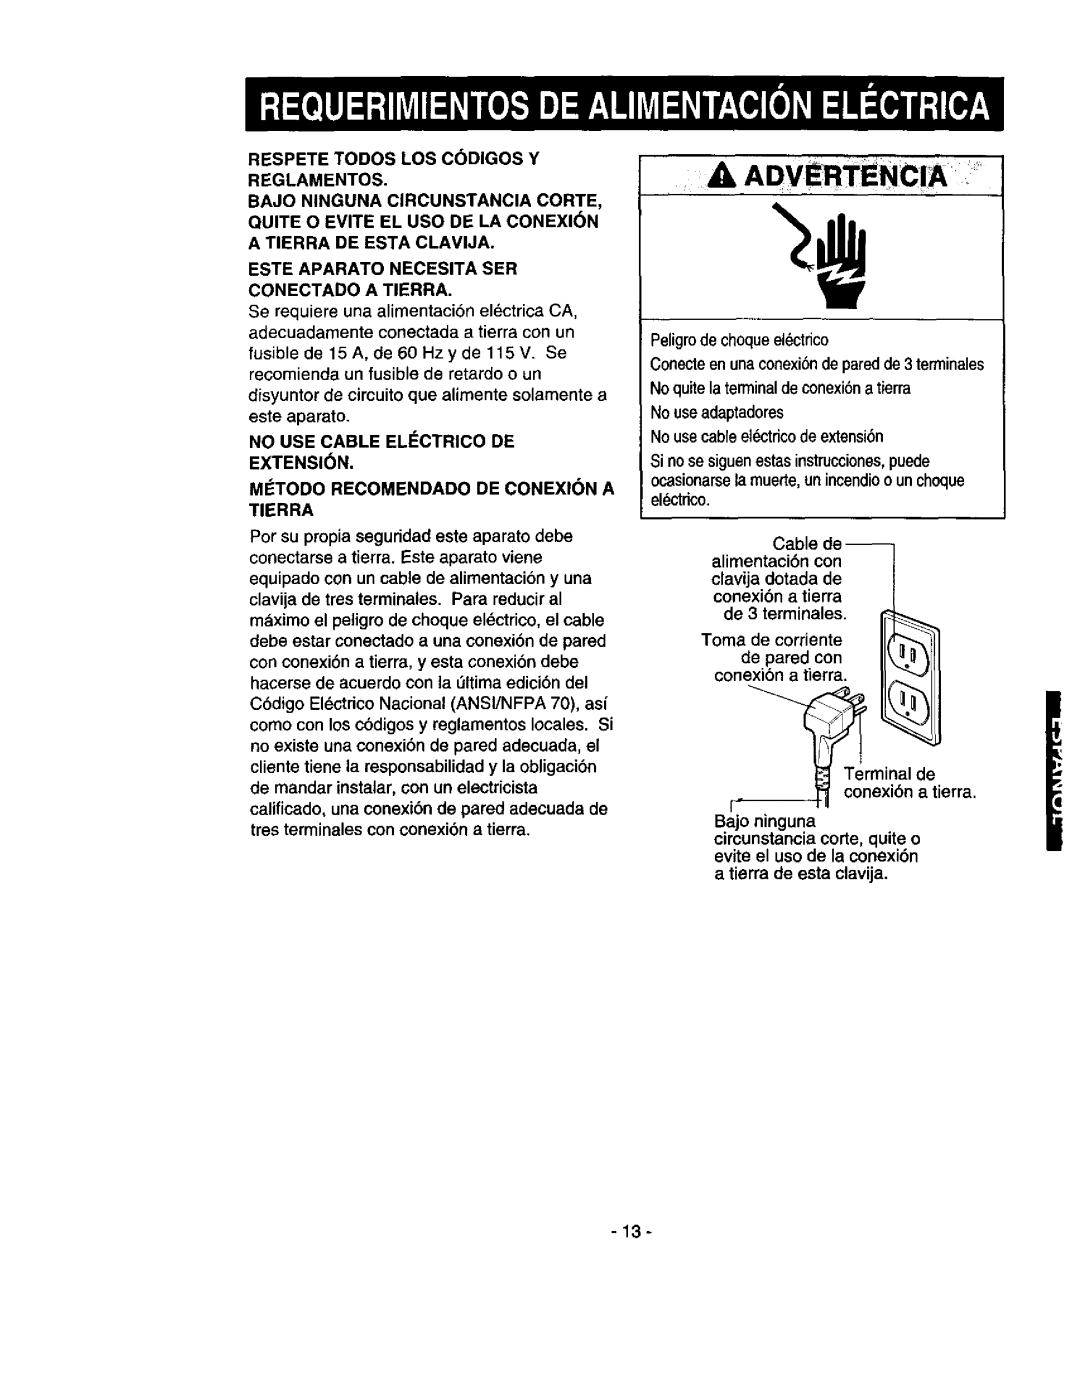 Kenmore 580.53301 owner manual rrl, A ADVER,rENCIA 